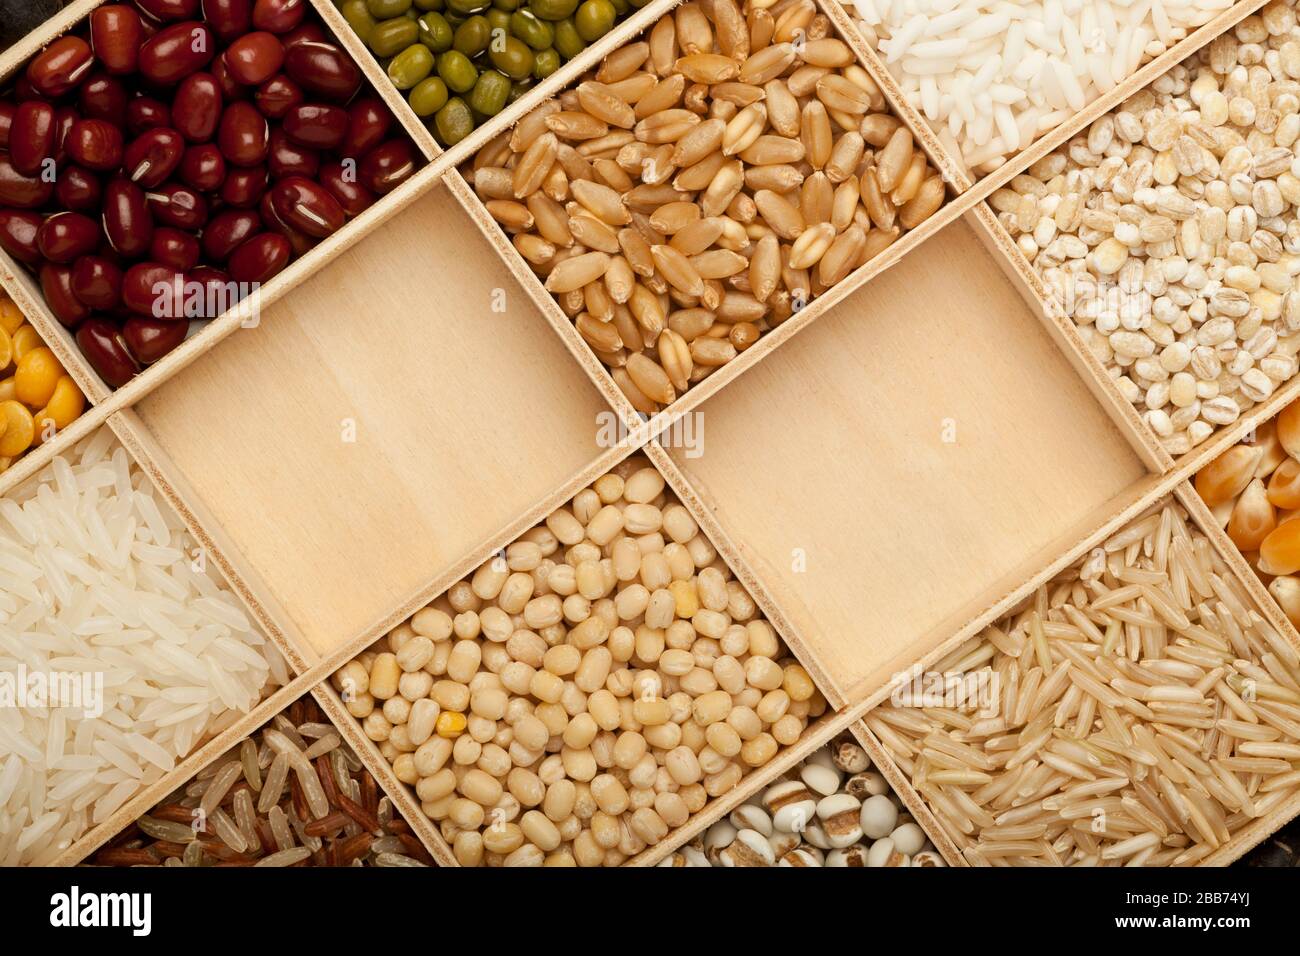 Different types of grains and beans with copy space Stock Photo